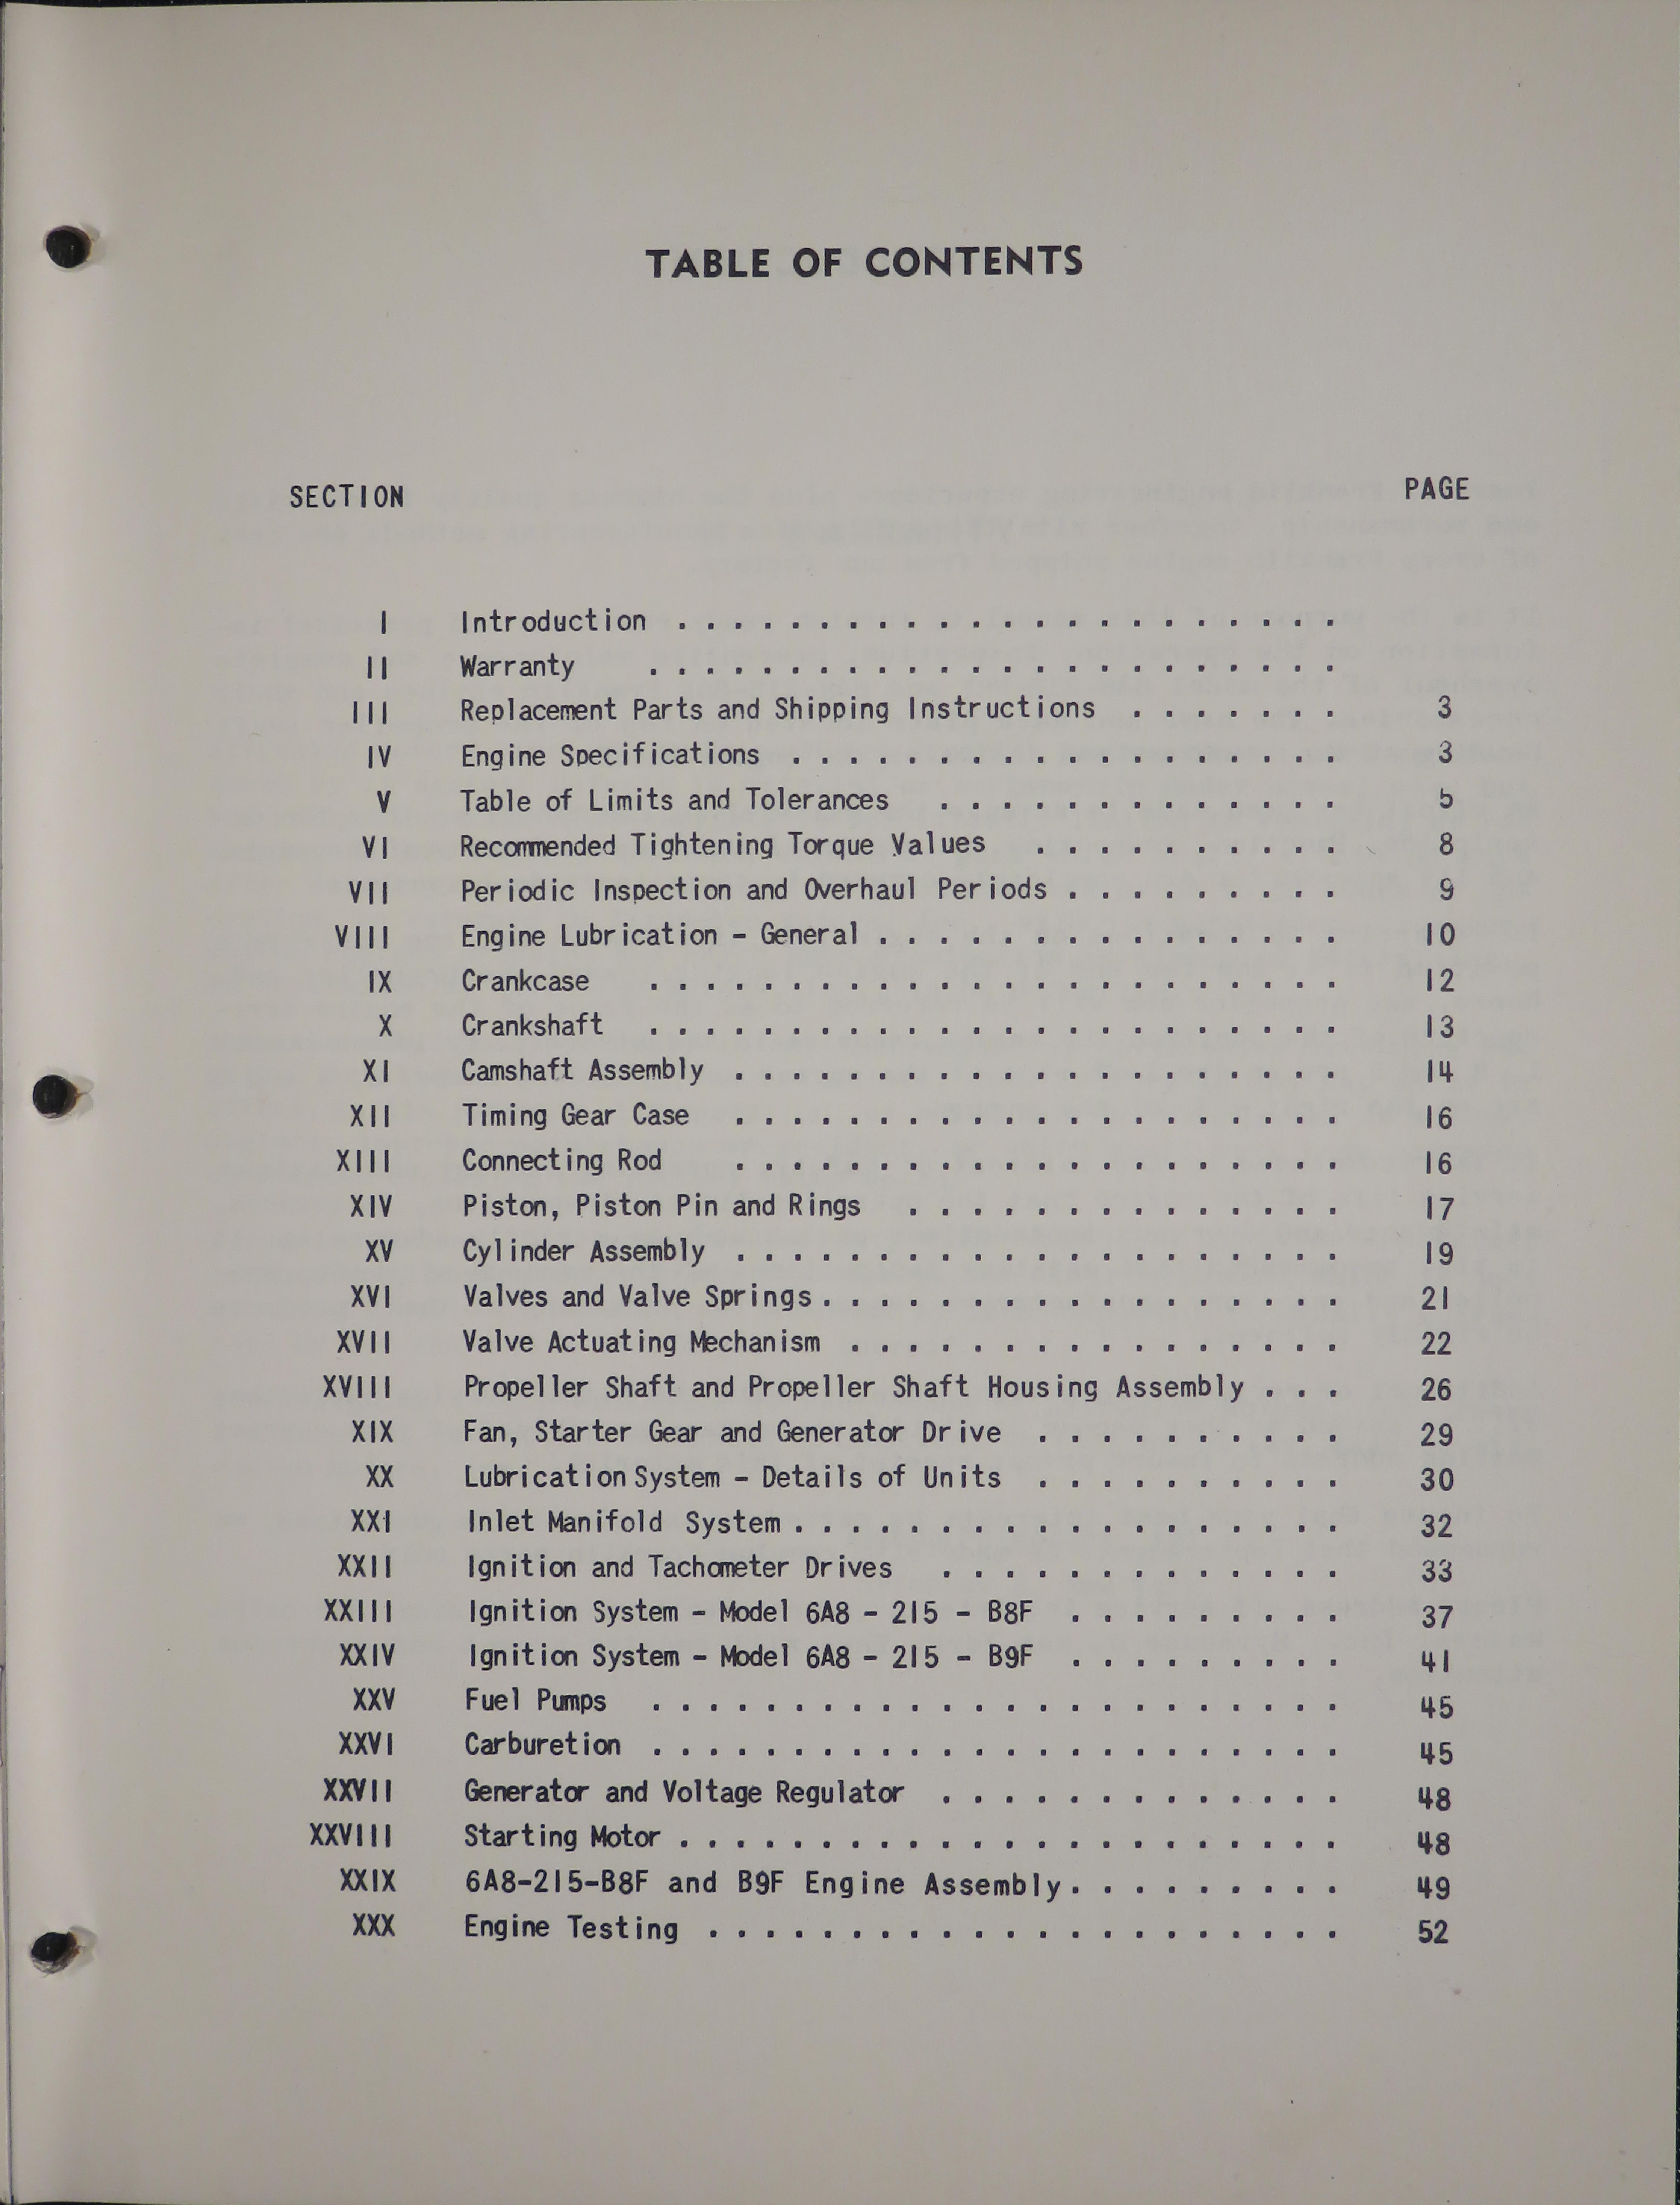 Sample page 5 from AirCorps Library document: Service Manual for Models 6A8-215-B8F and B9F Engines